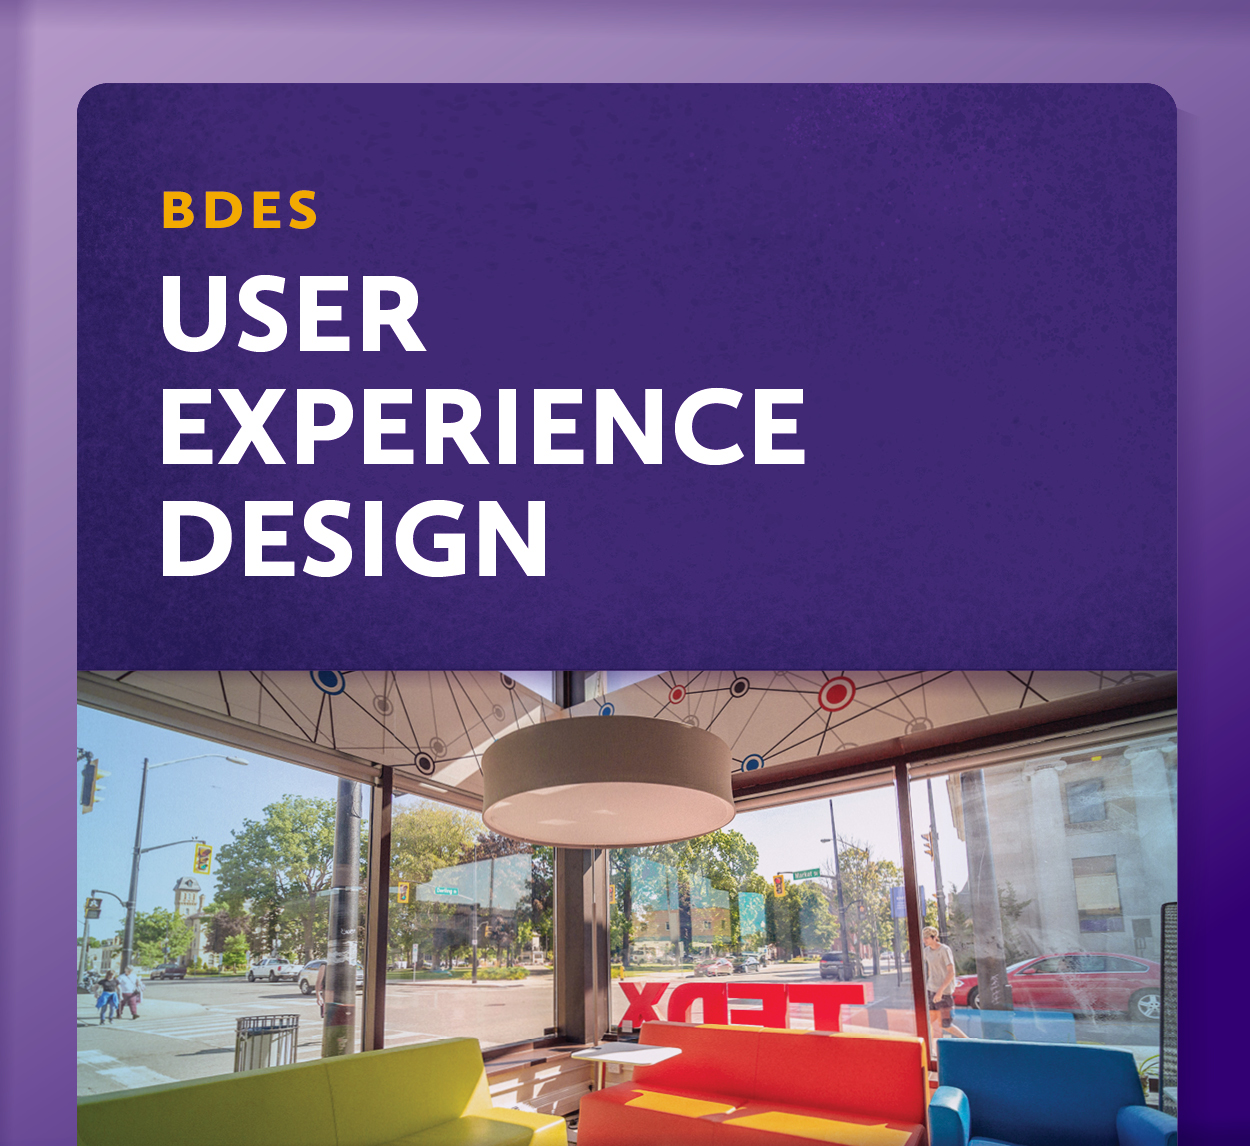 Showcase Image for User Experience Design (BDes)